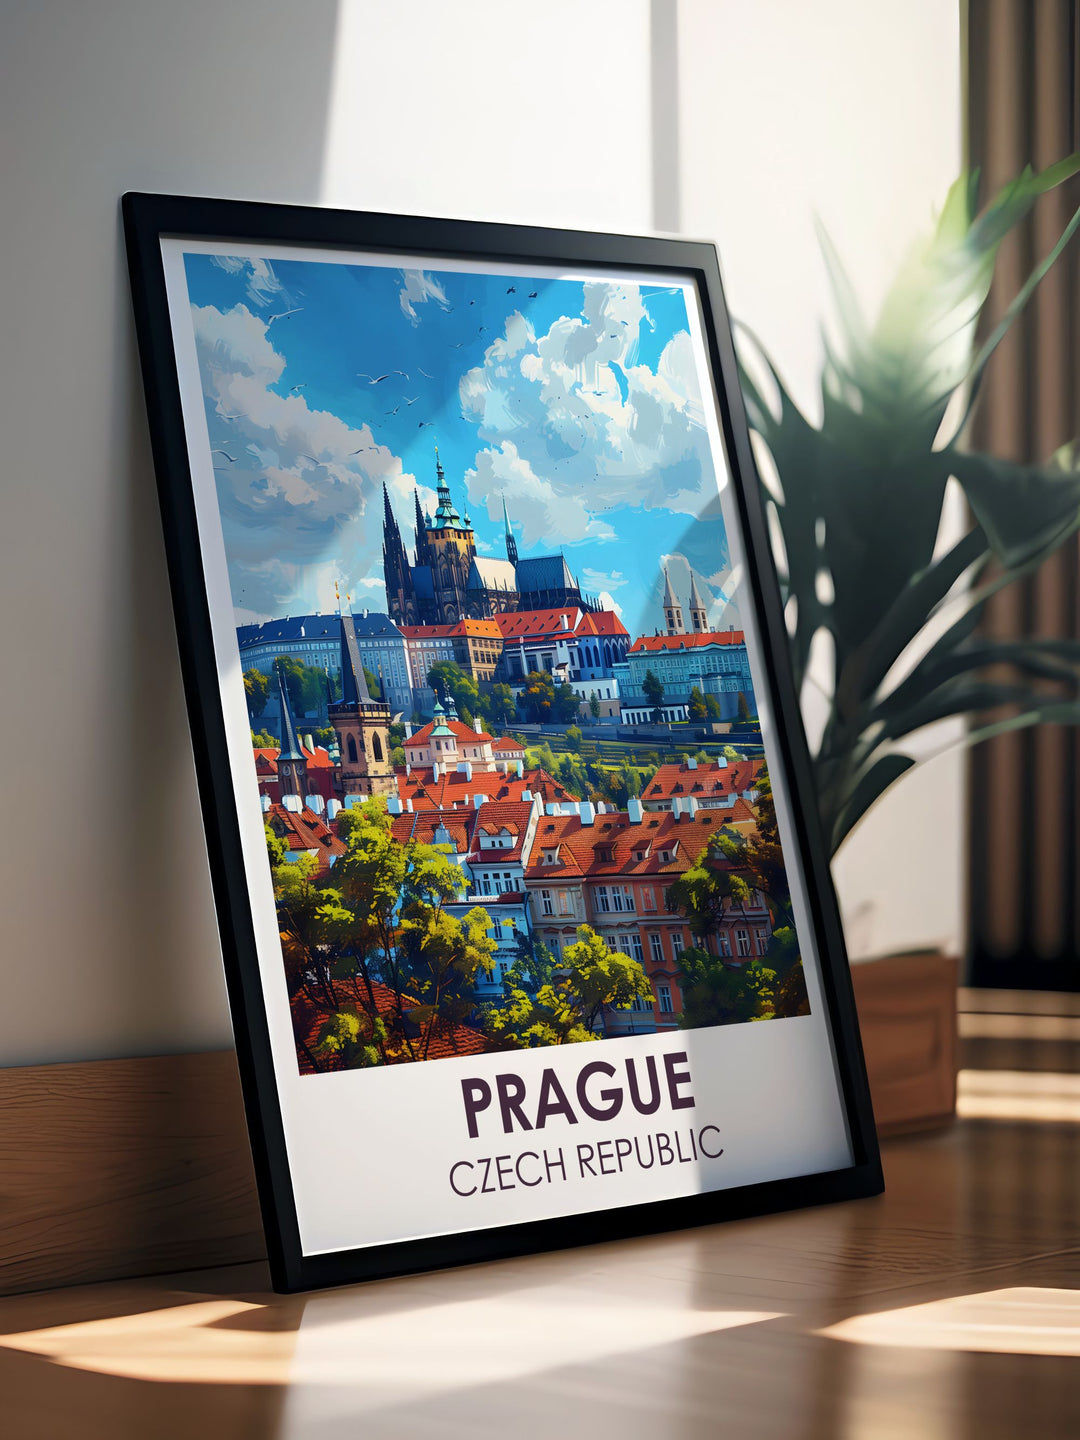 Enhance your living space with a captivating Prague Art Print. This Prague Wall Art features intricate details of the citys architecture, bringing a sense of adventure and elegance to your home. Ideal for those who love travel and history.